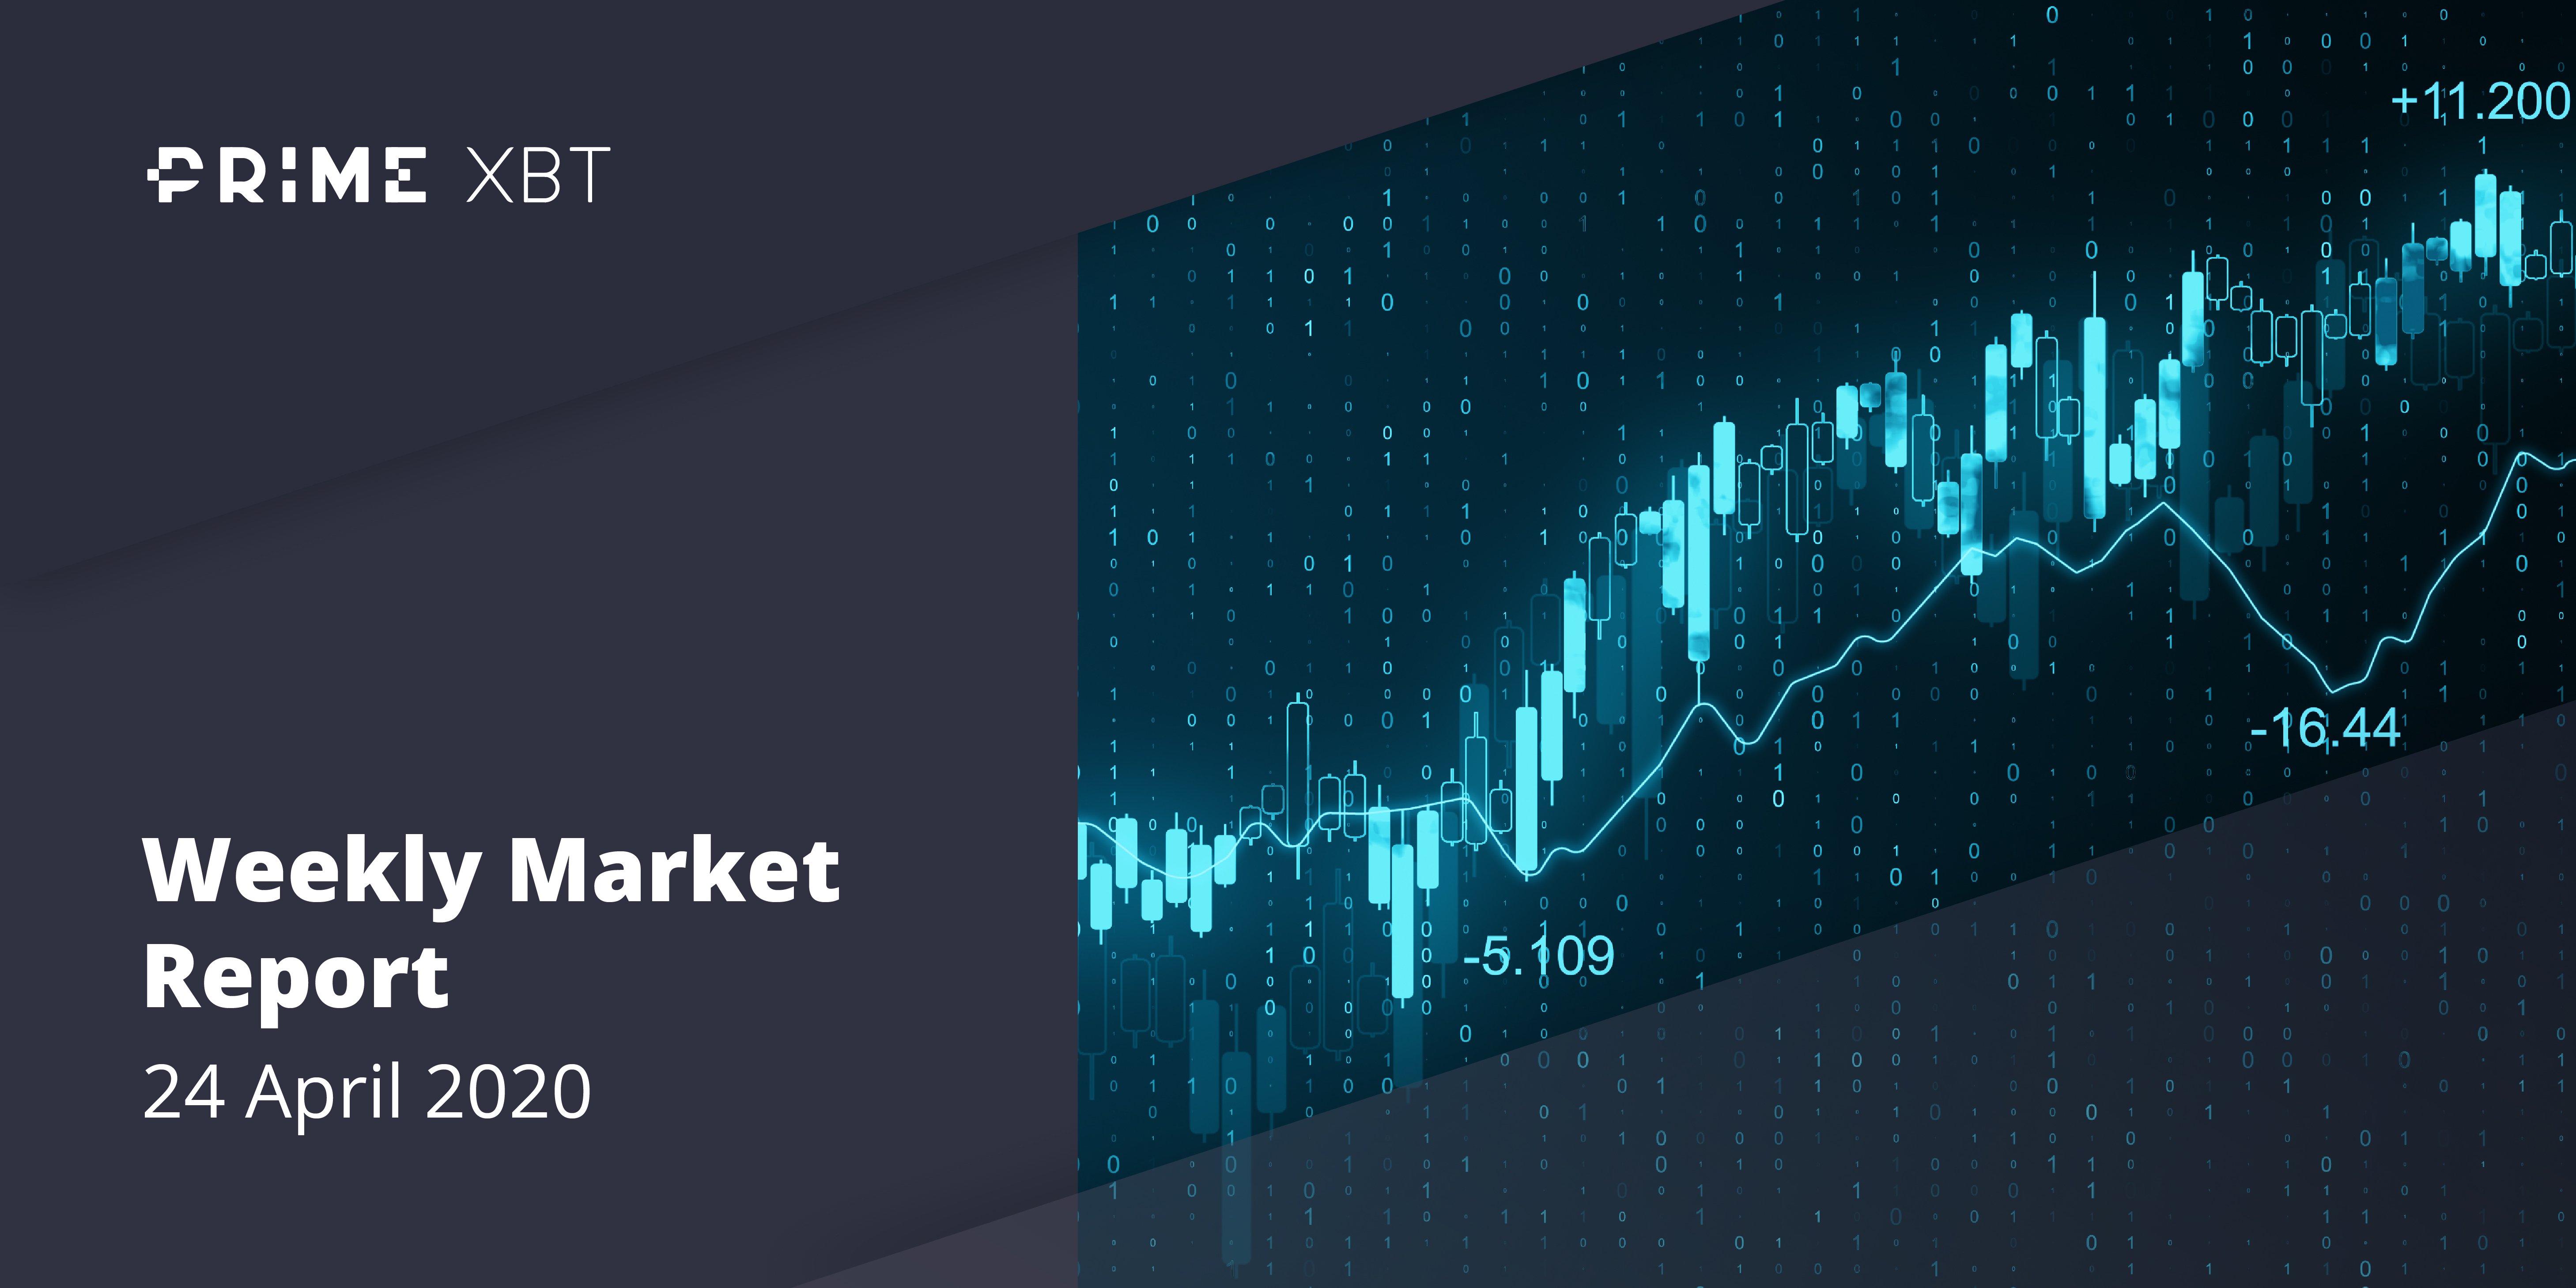 Crypto Market Report: Bitcoin Back in Green for 2020 after Strong Week But Market Confidence Still Low - 24.04.20